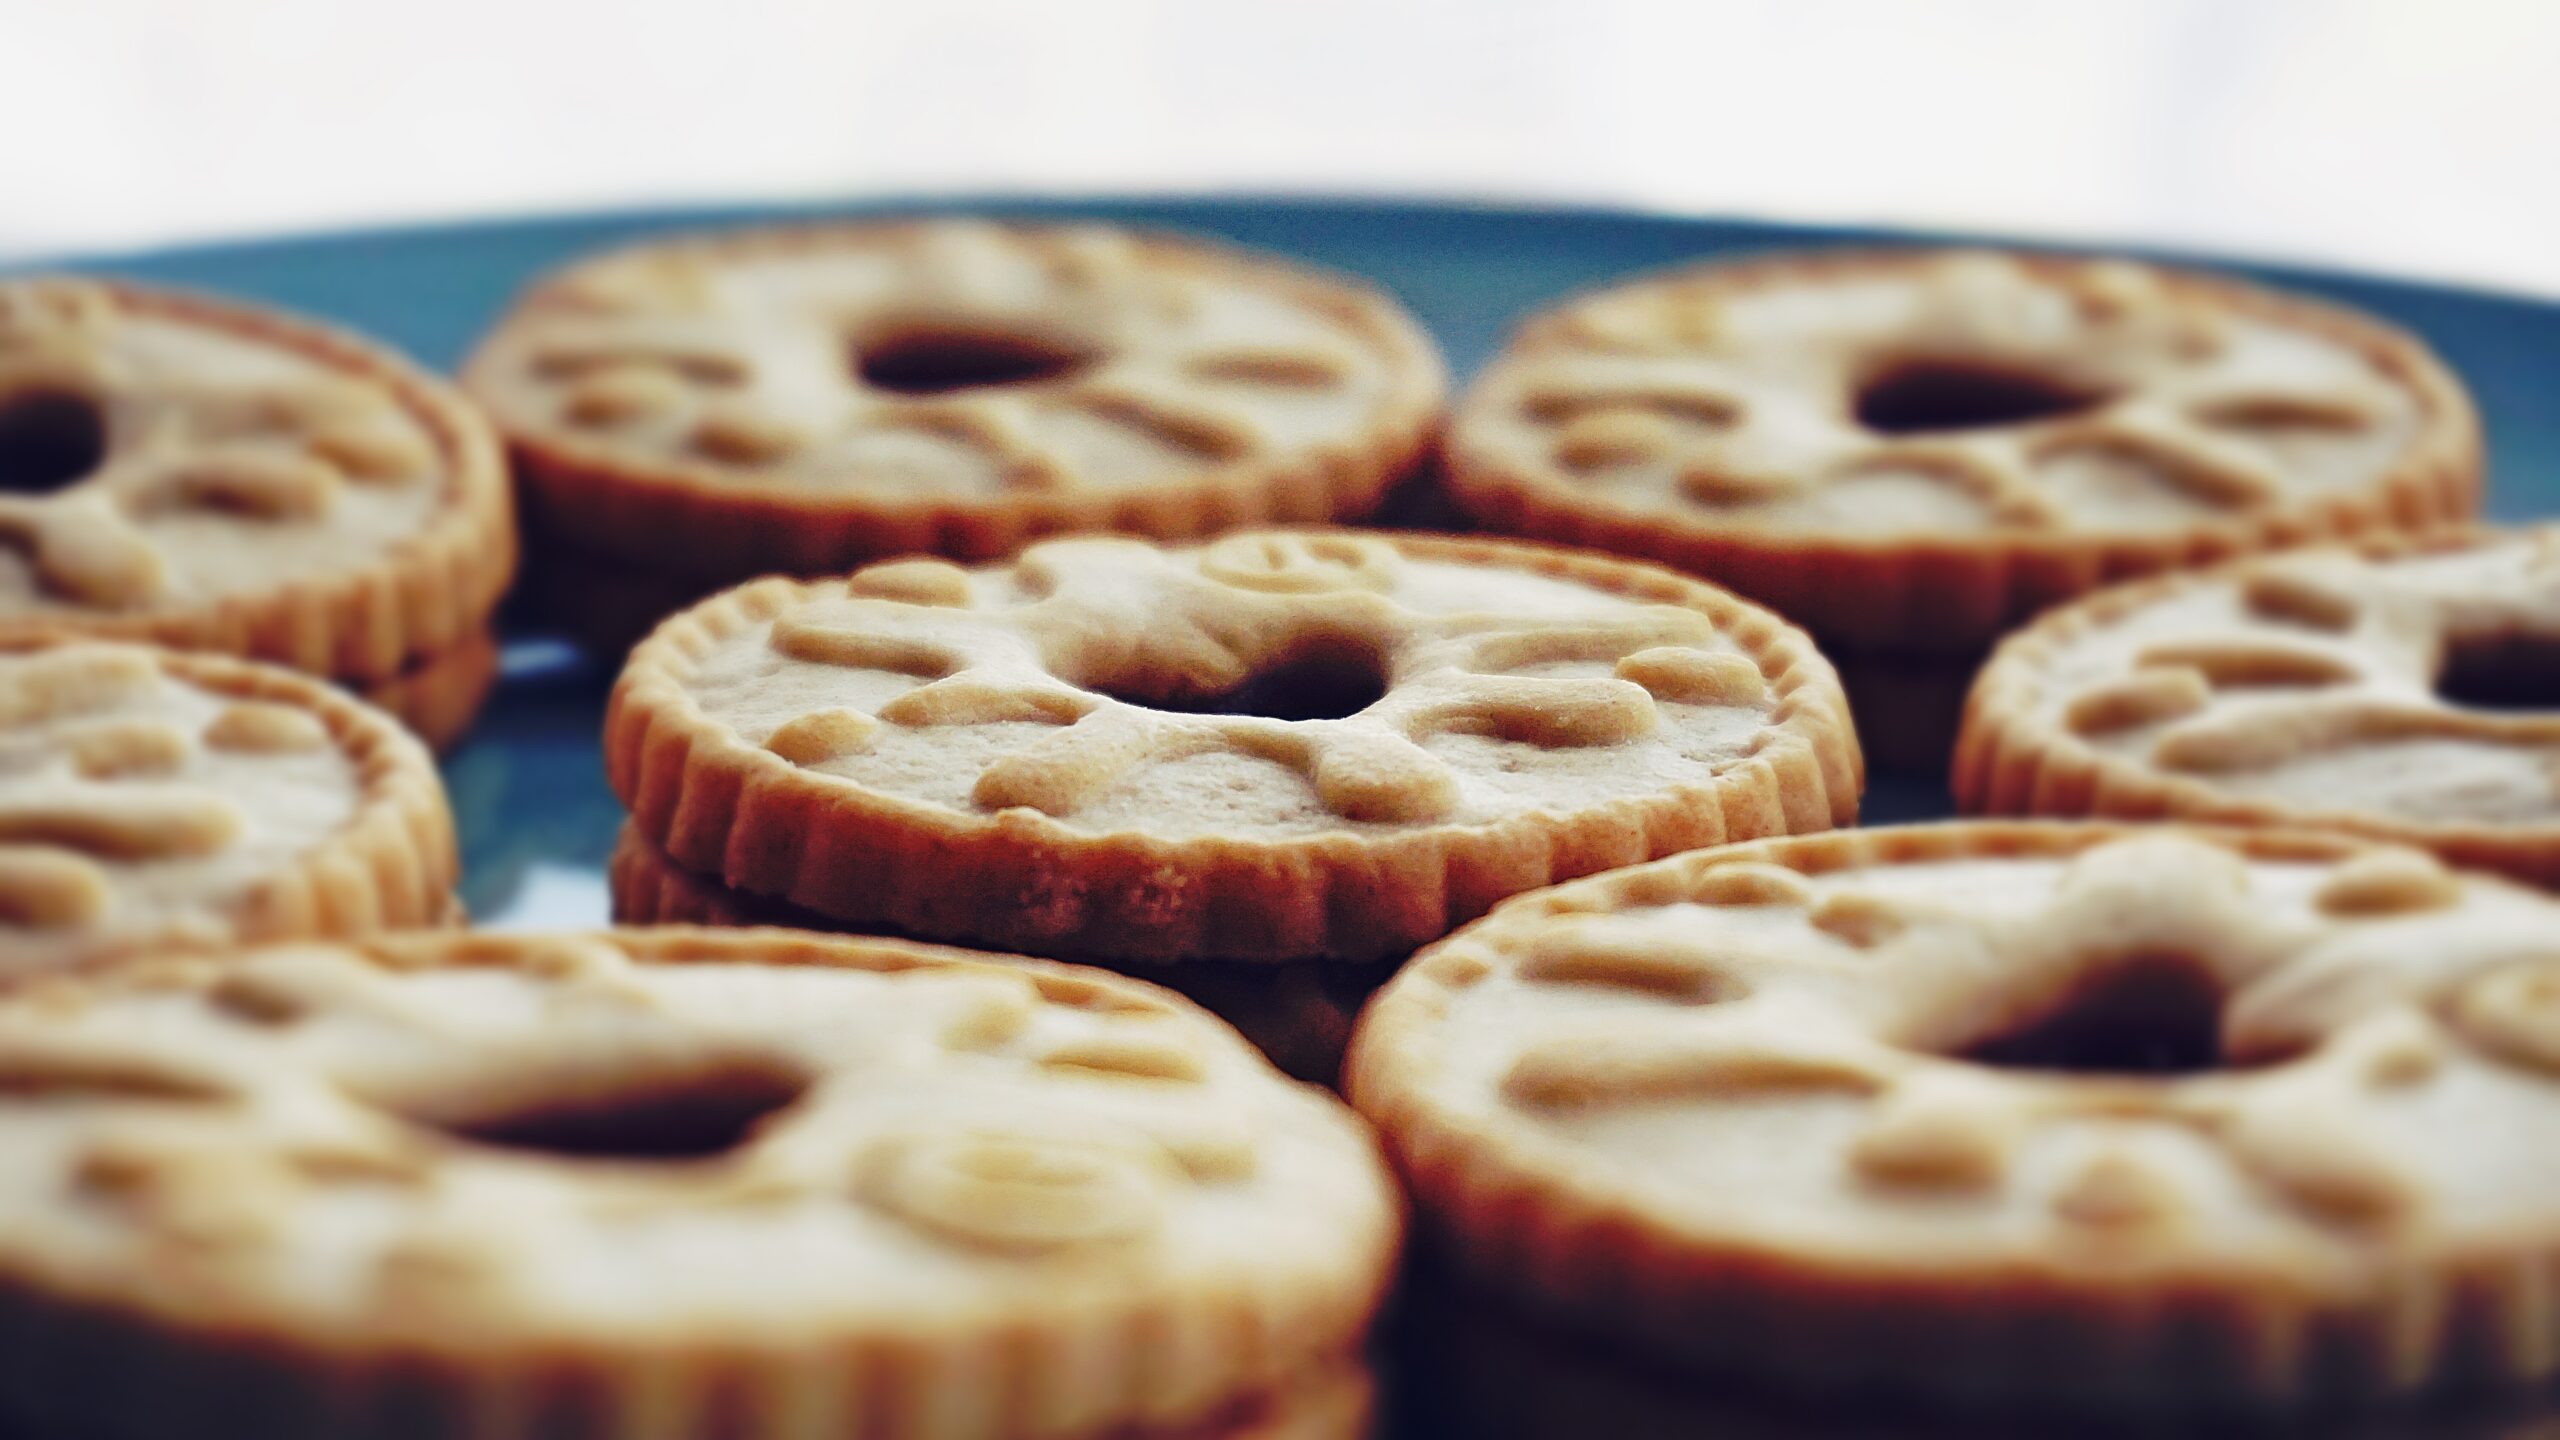 A plate of jammy dodgers